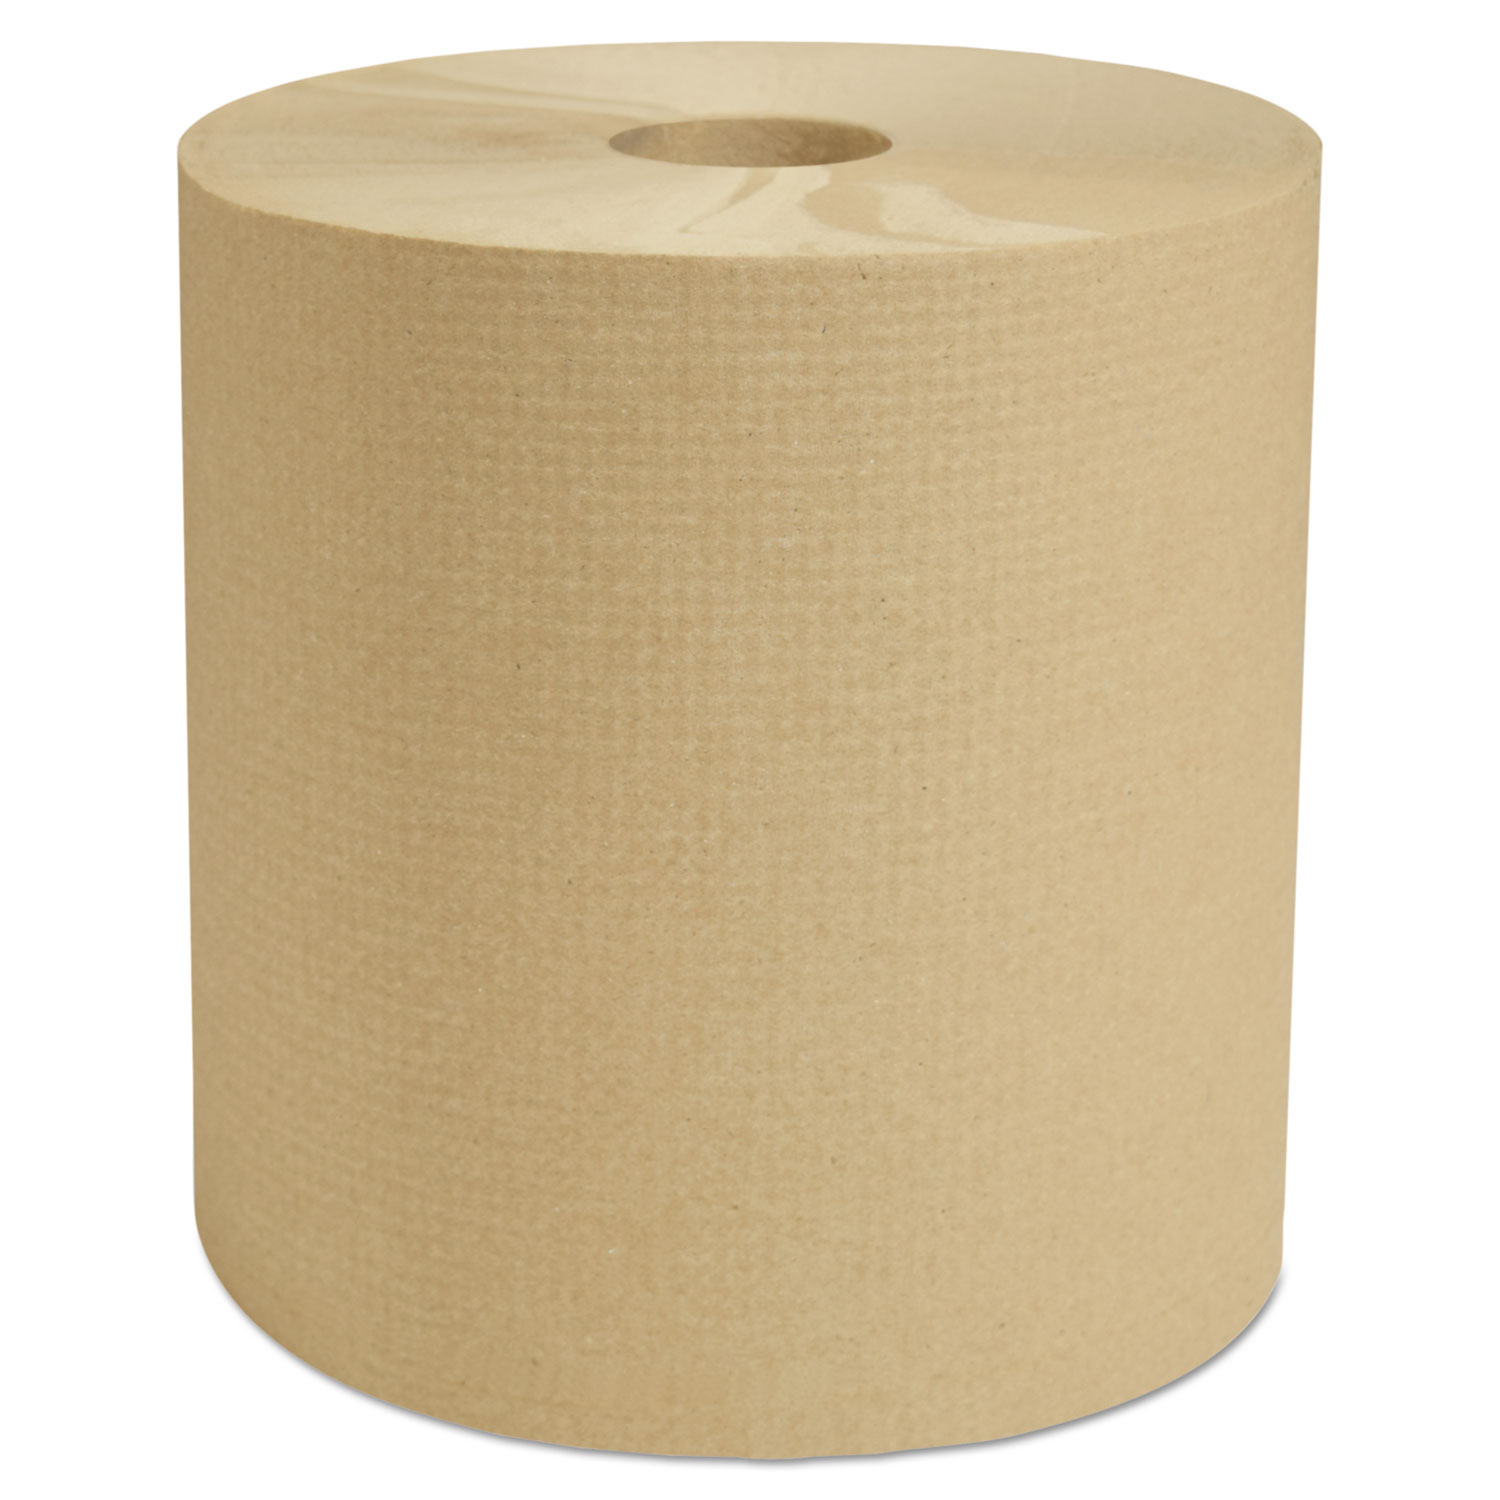  Cascades PRO H285 Select Hardwound Roll Towels, Natural, 7 7/8 x 800 ft, 6/Carton (CSDH285) 